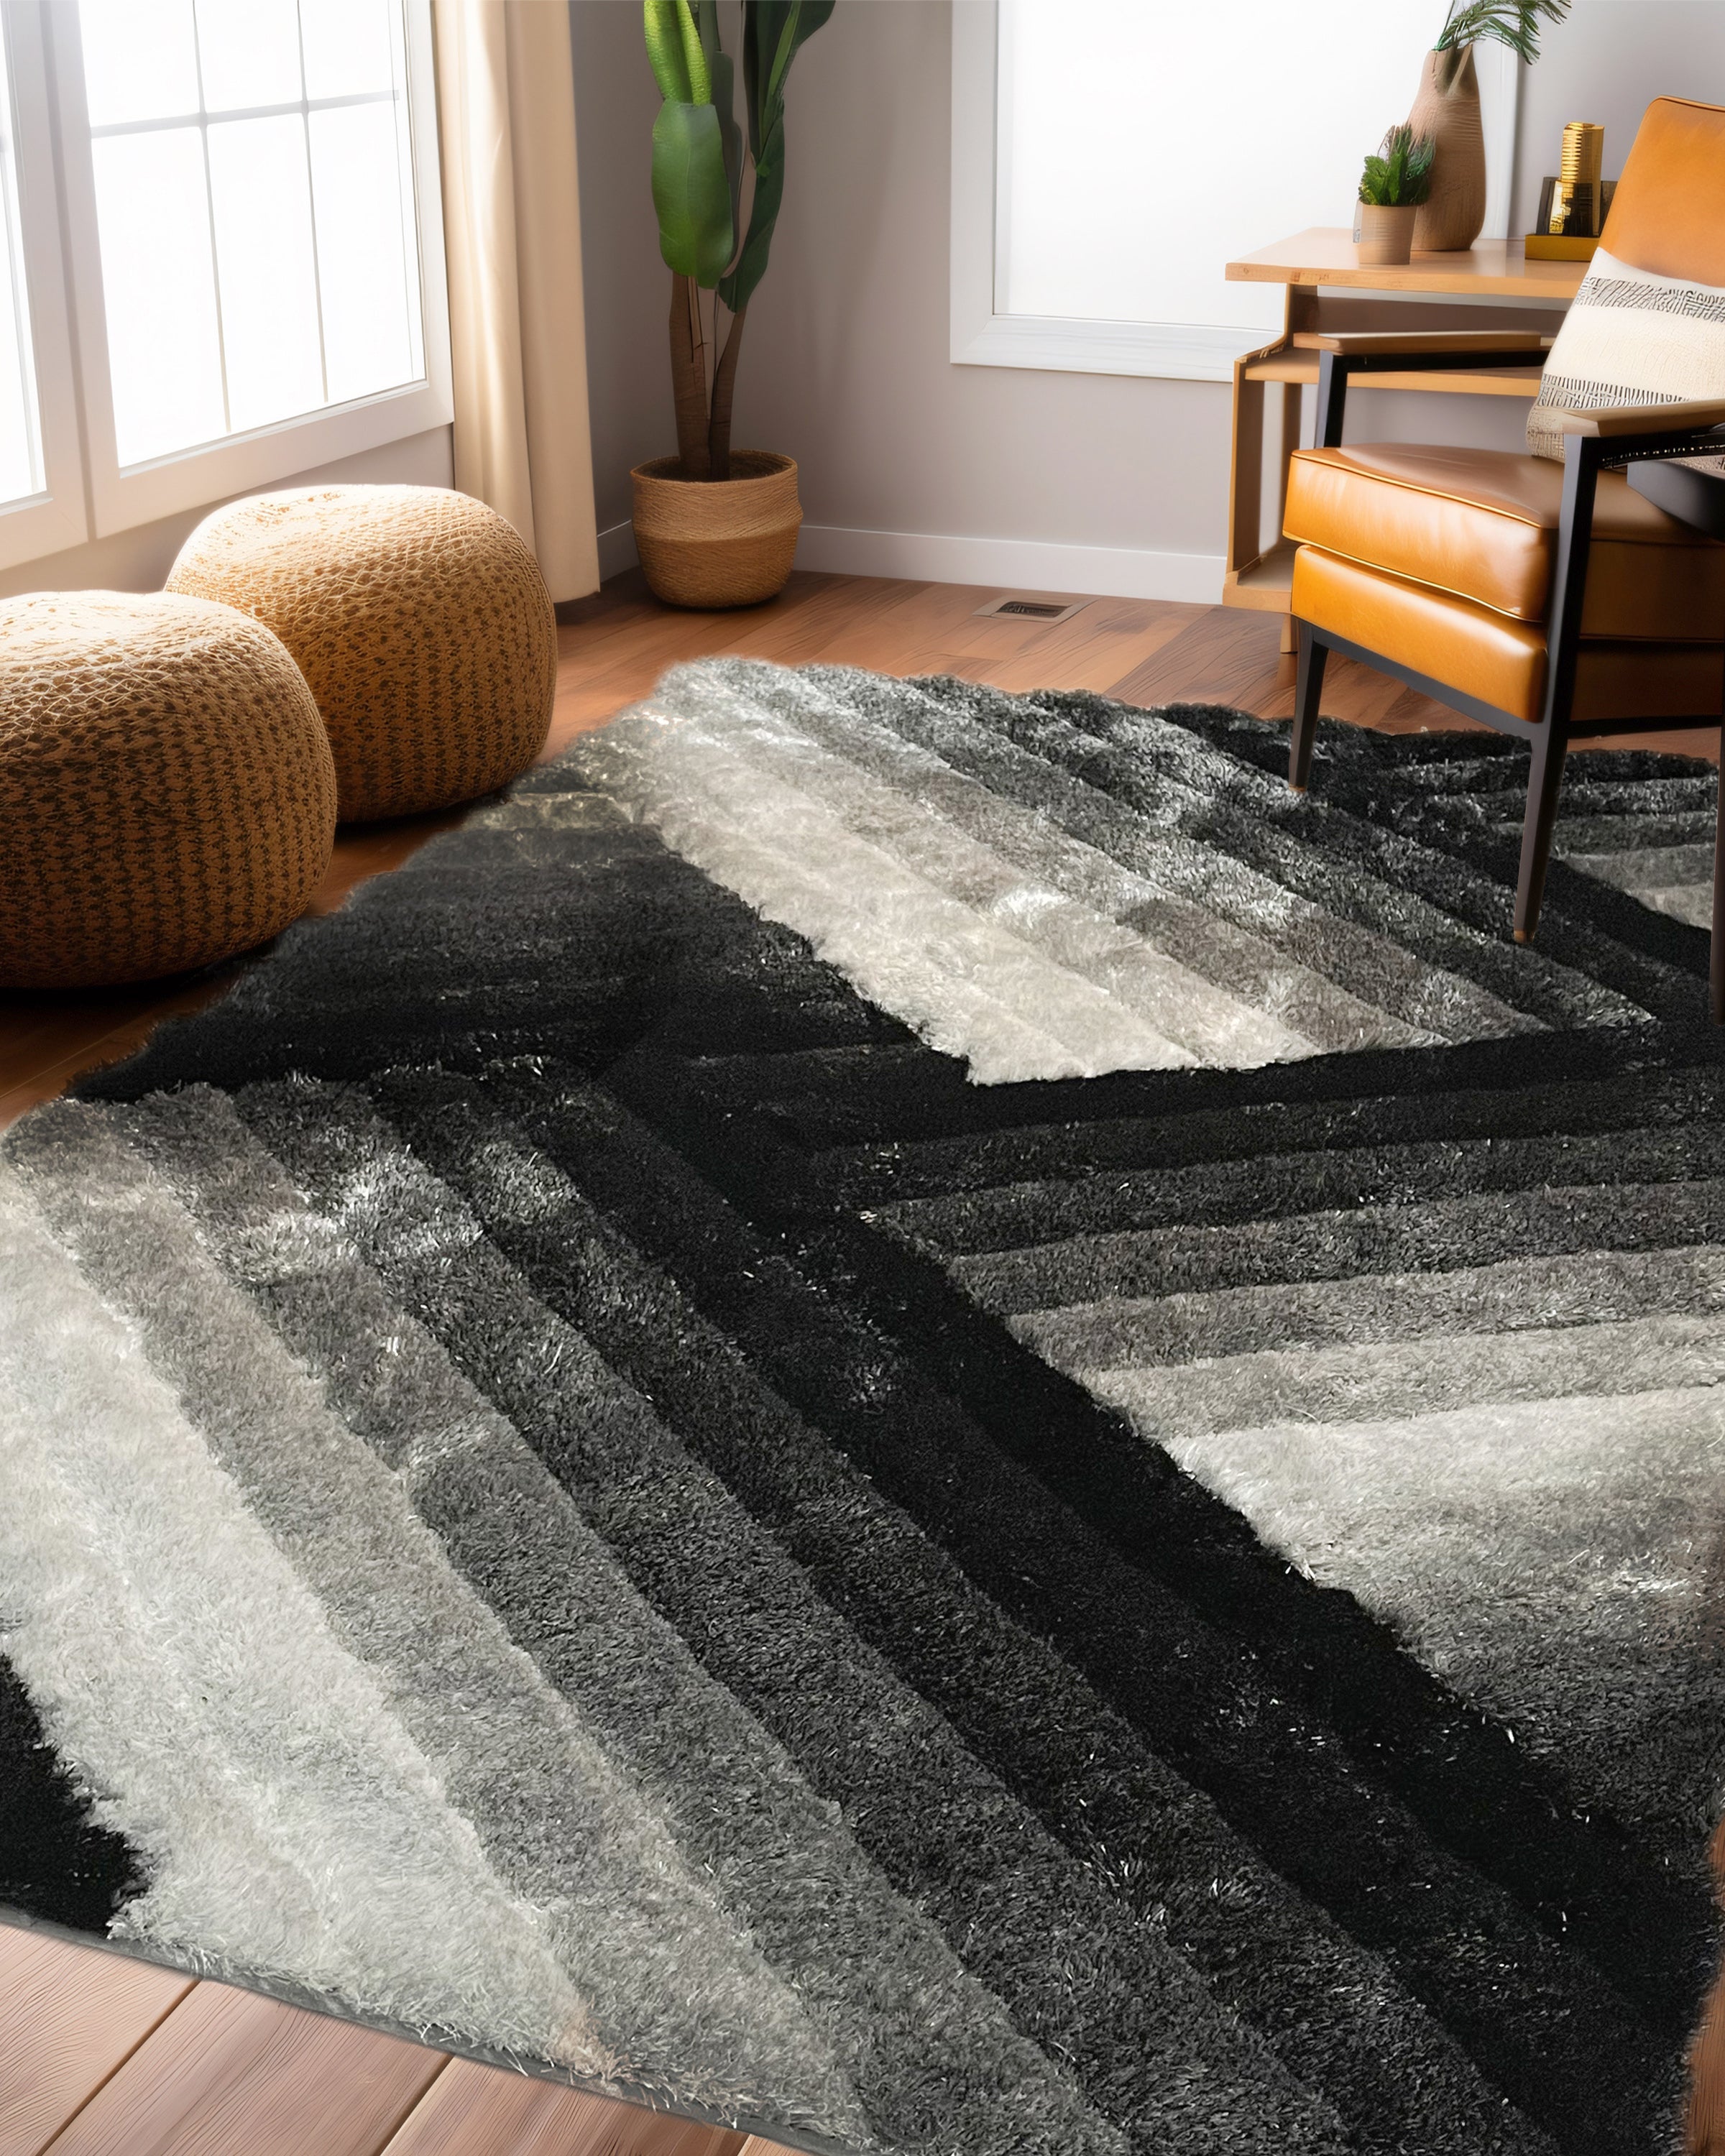 Artistic Lines Black And White Shag Area Rug